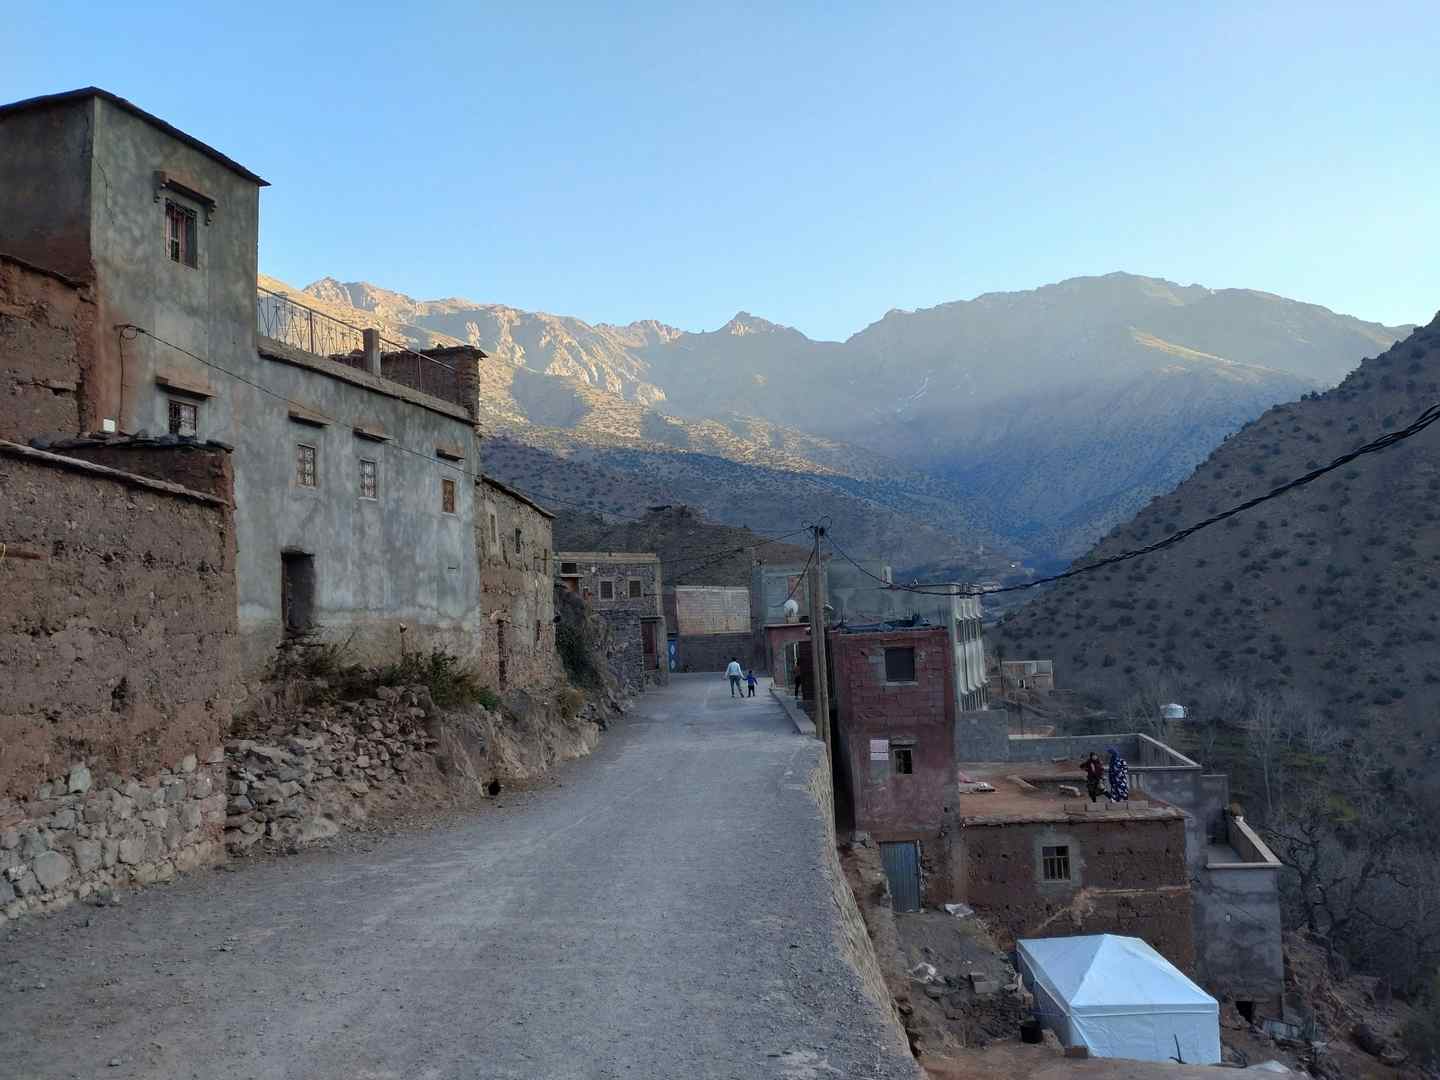 An awesome time in the High Atlas